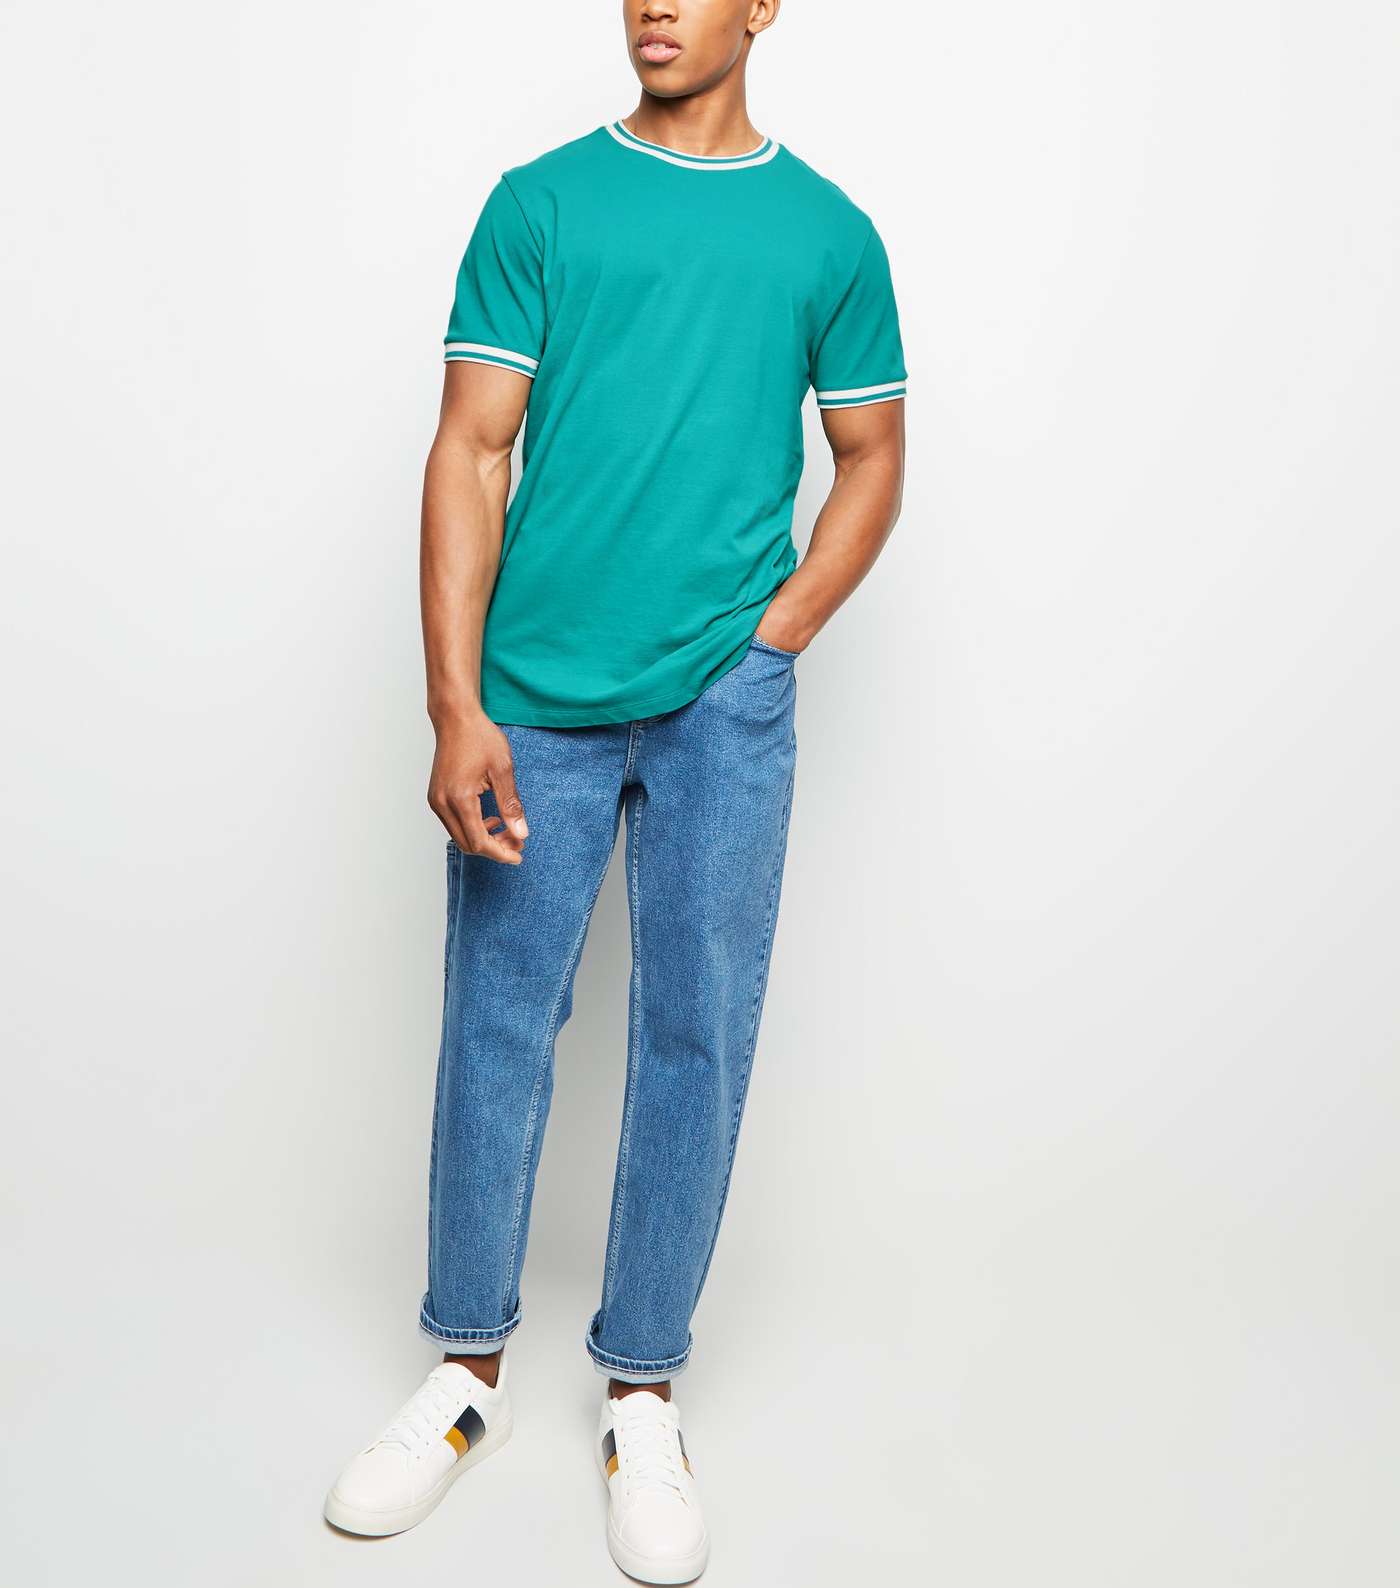 Teal Tipped Pique T-Shirt Image 2